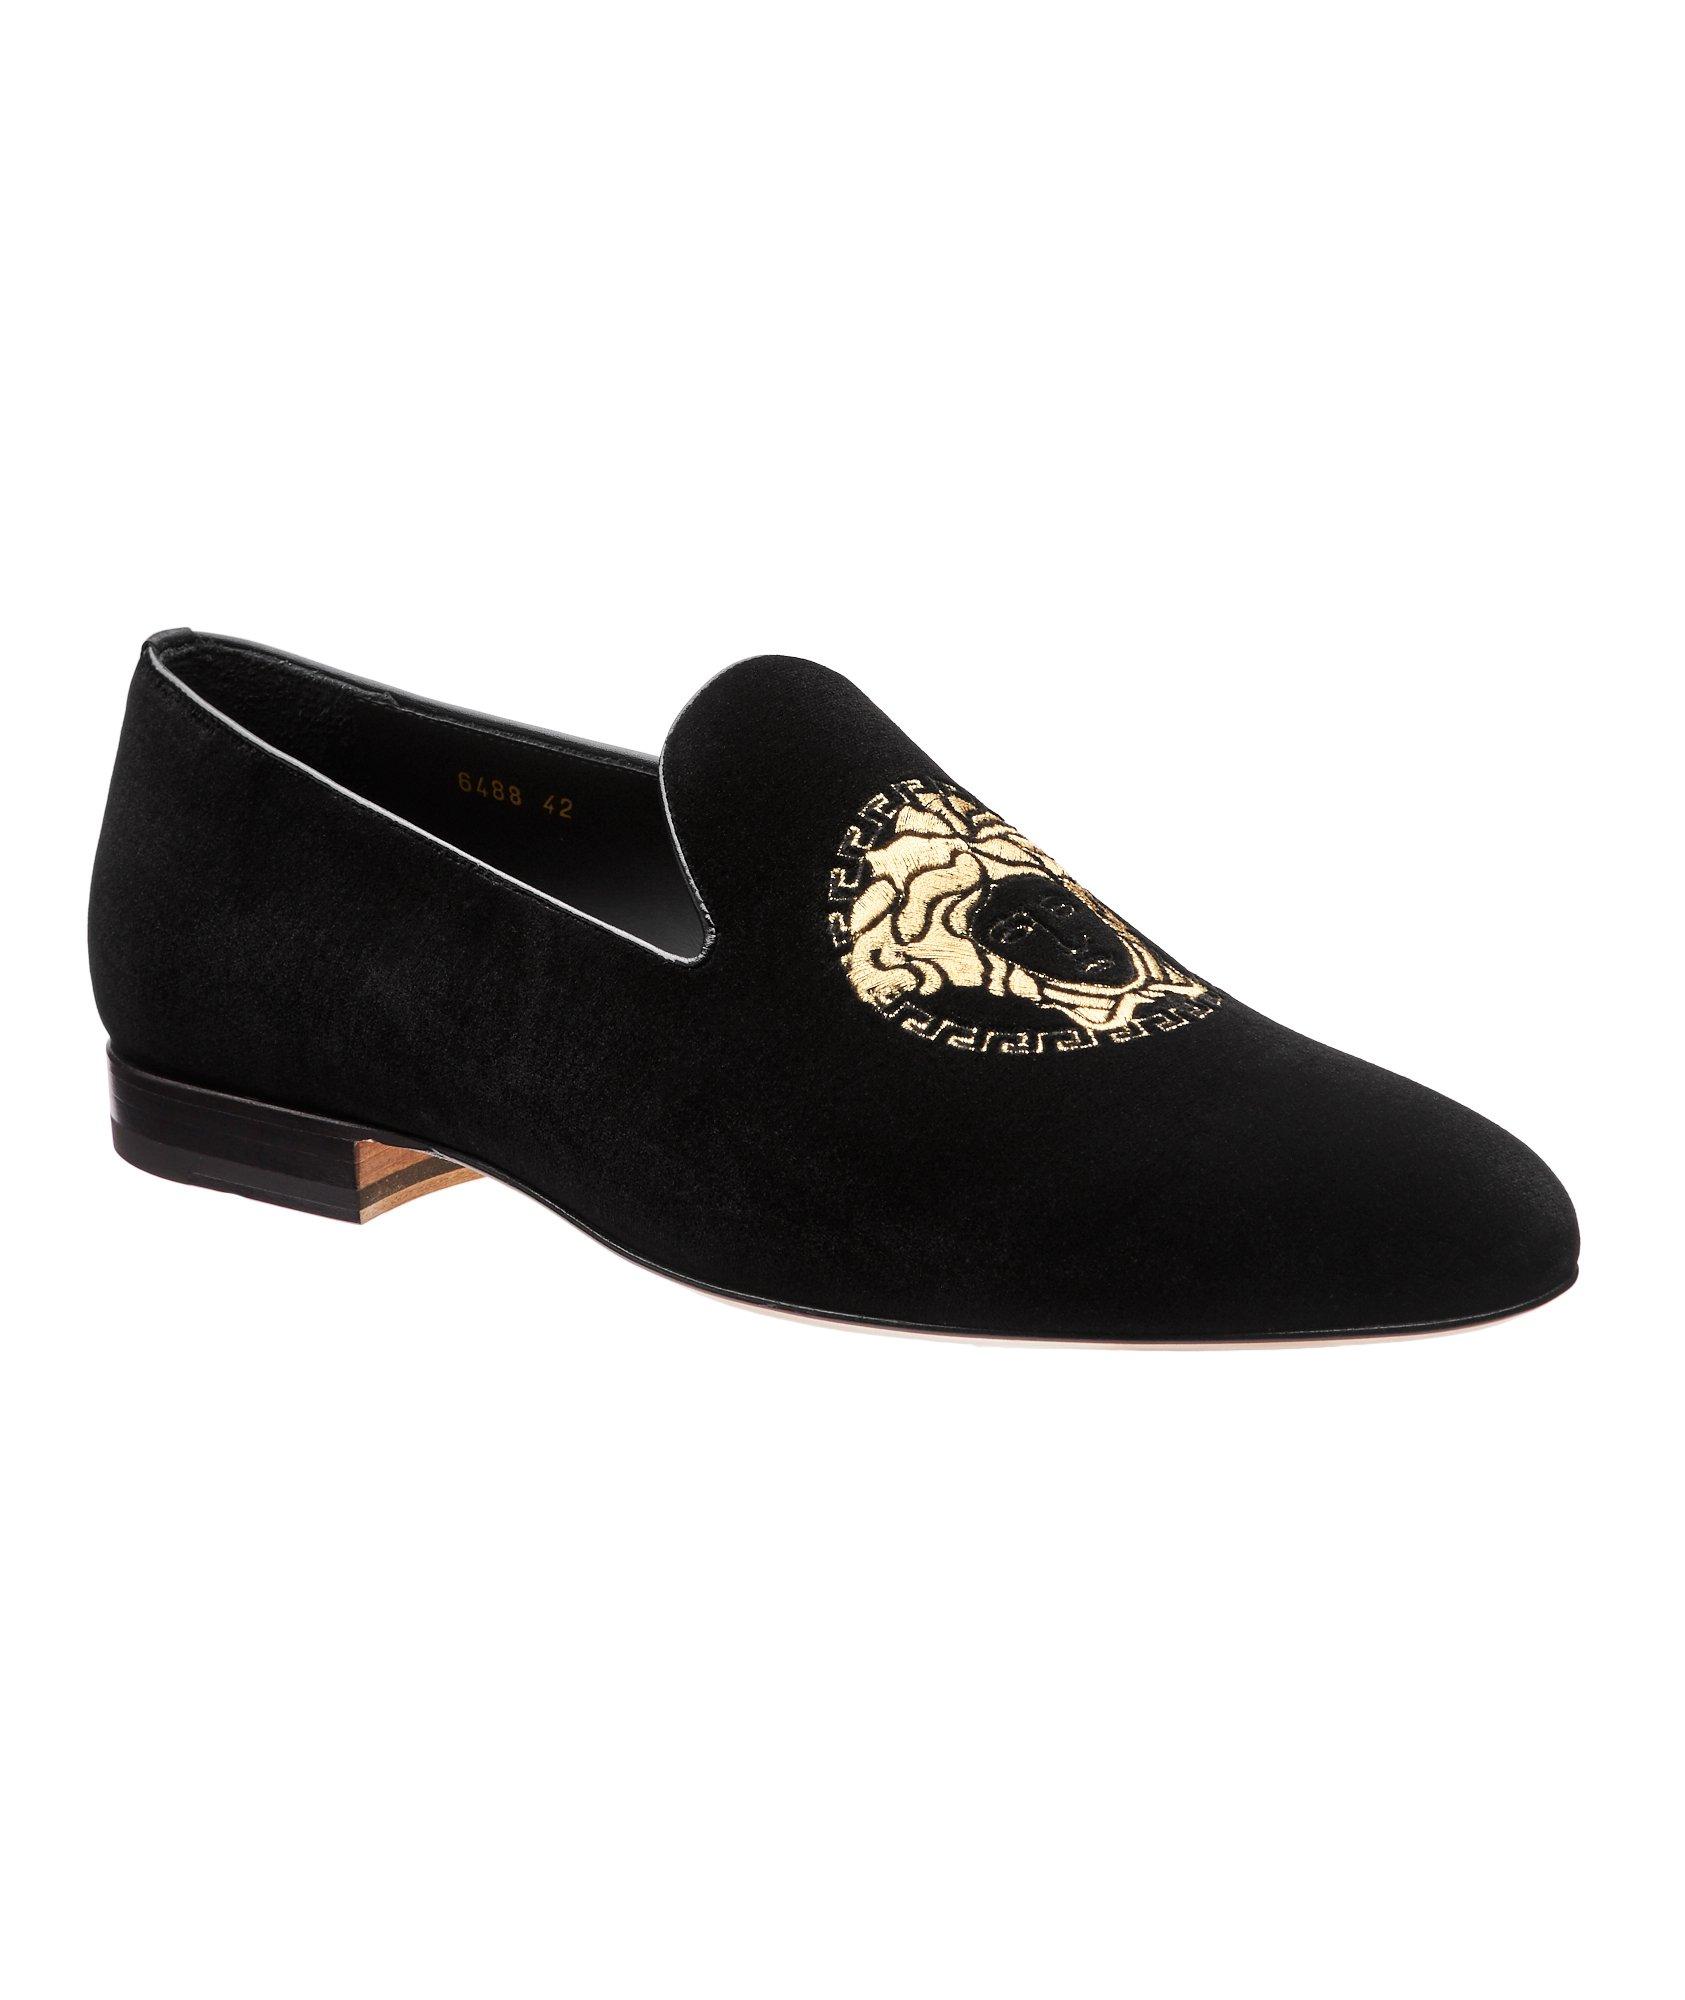 Embroidered Velvet Loafers image 0